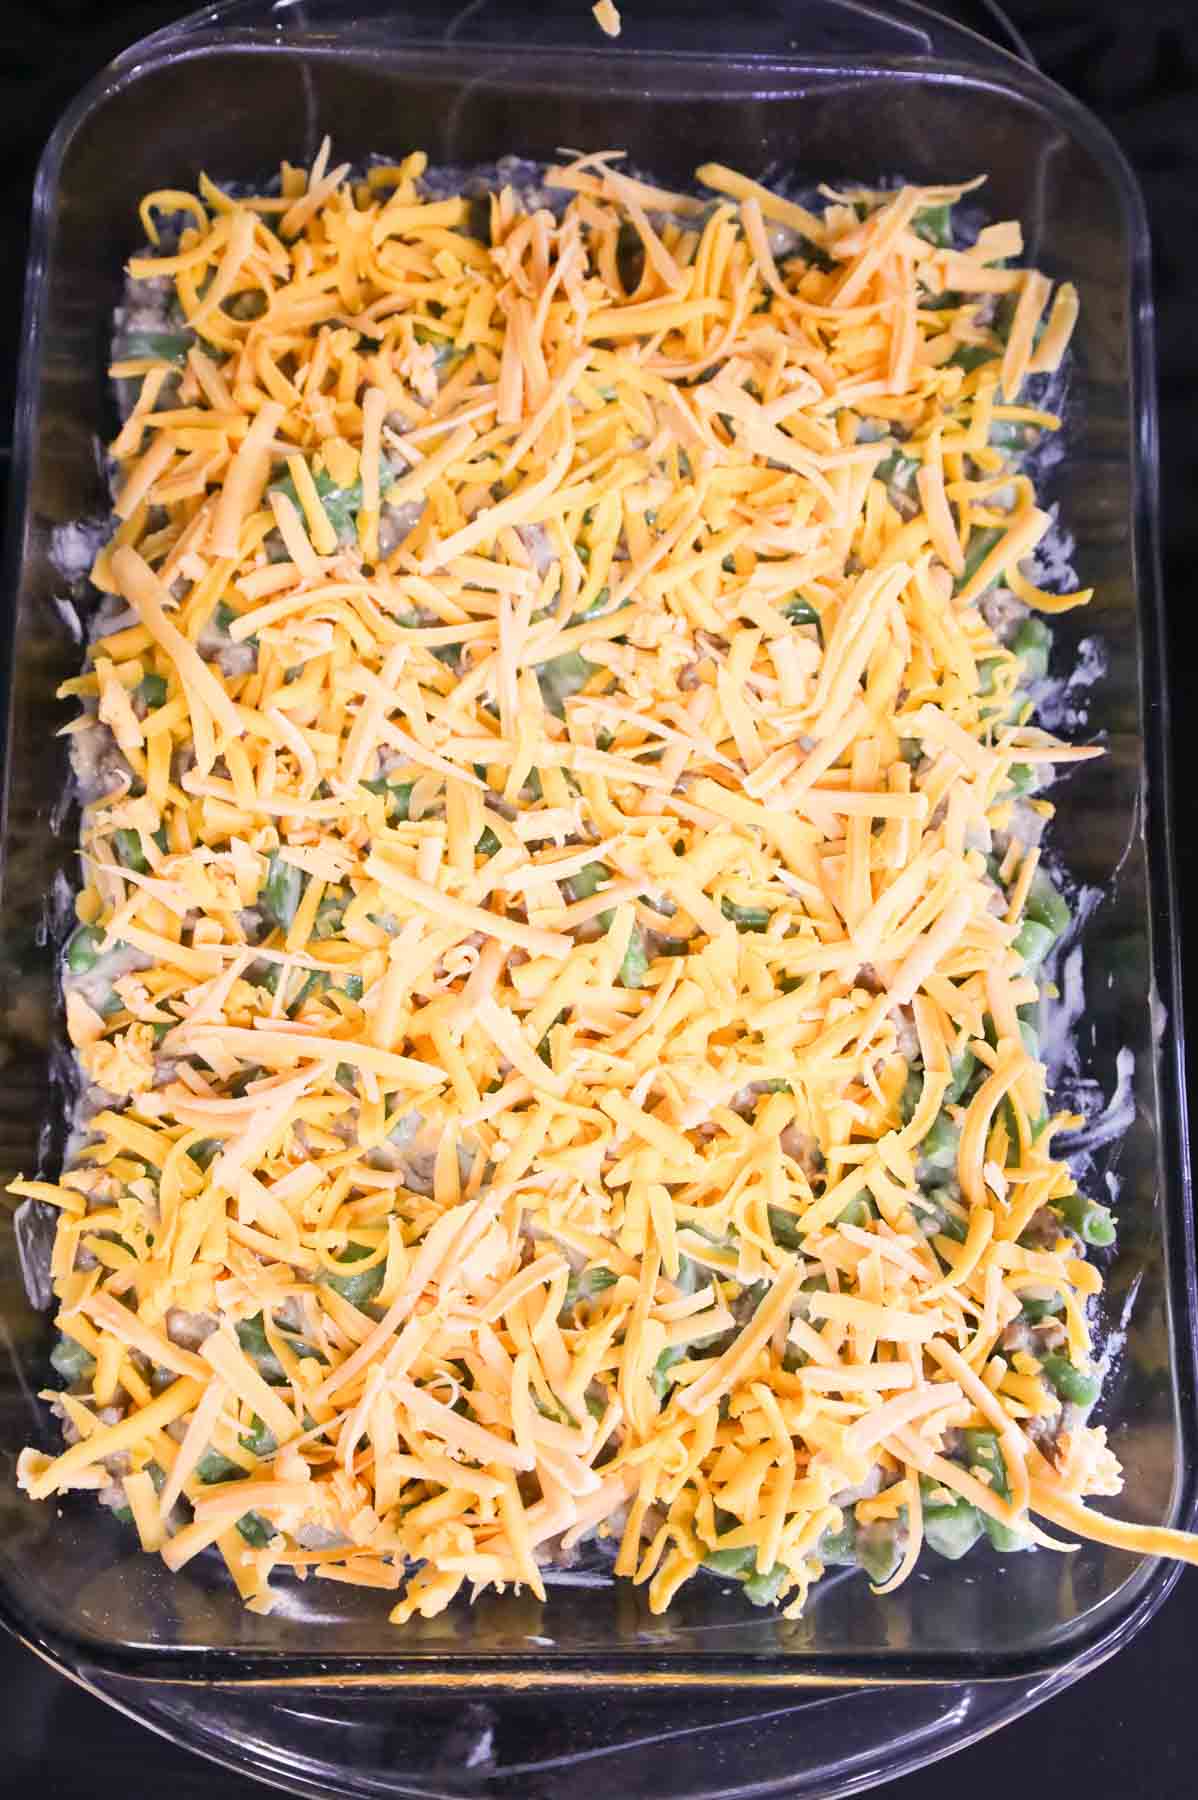 shredded cheddar cheese sprinkled over green bean and ground beef casserole